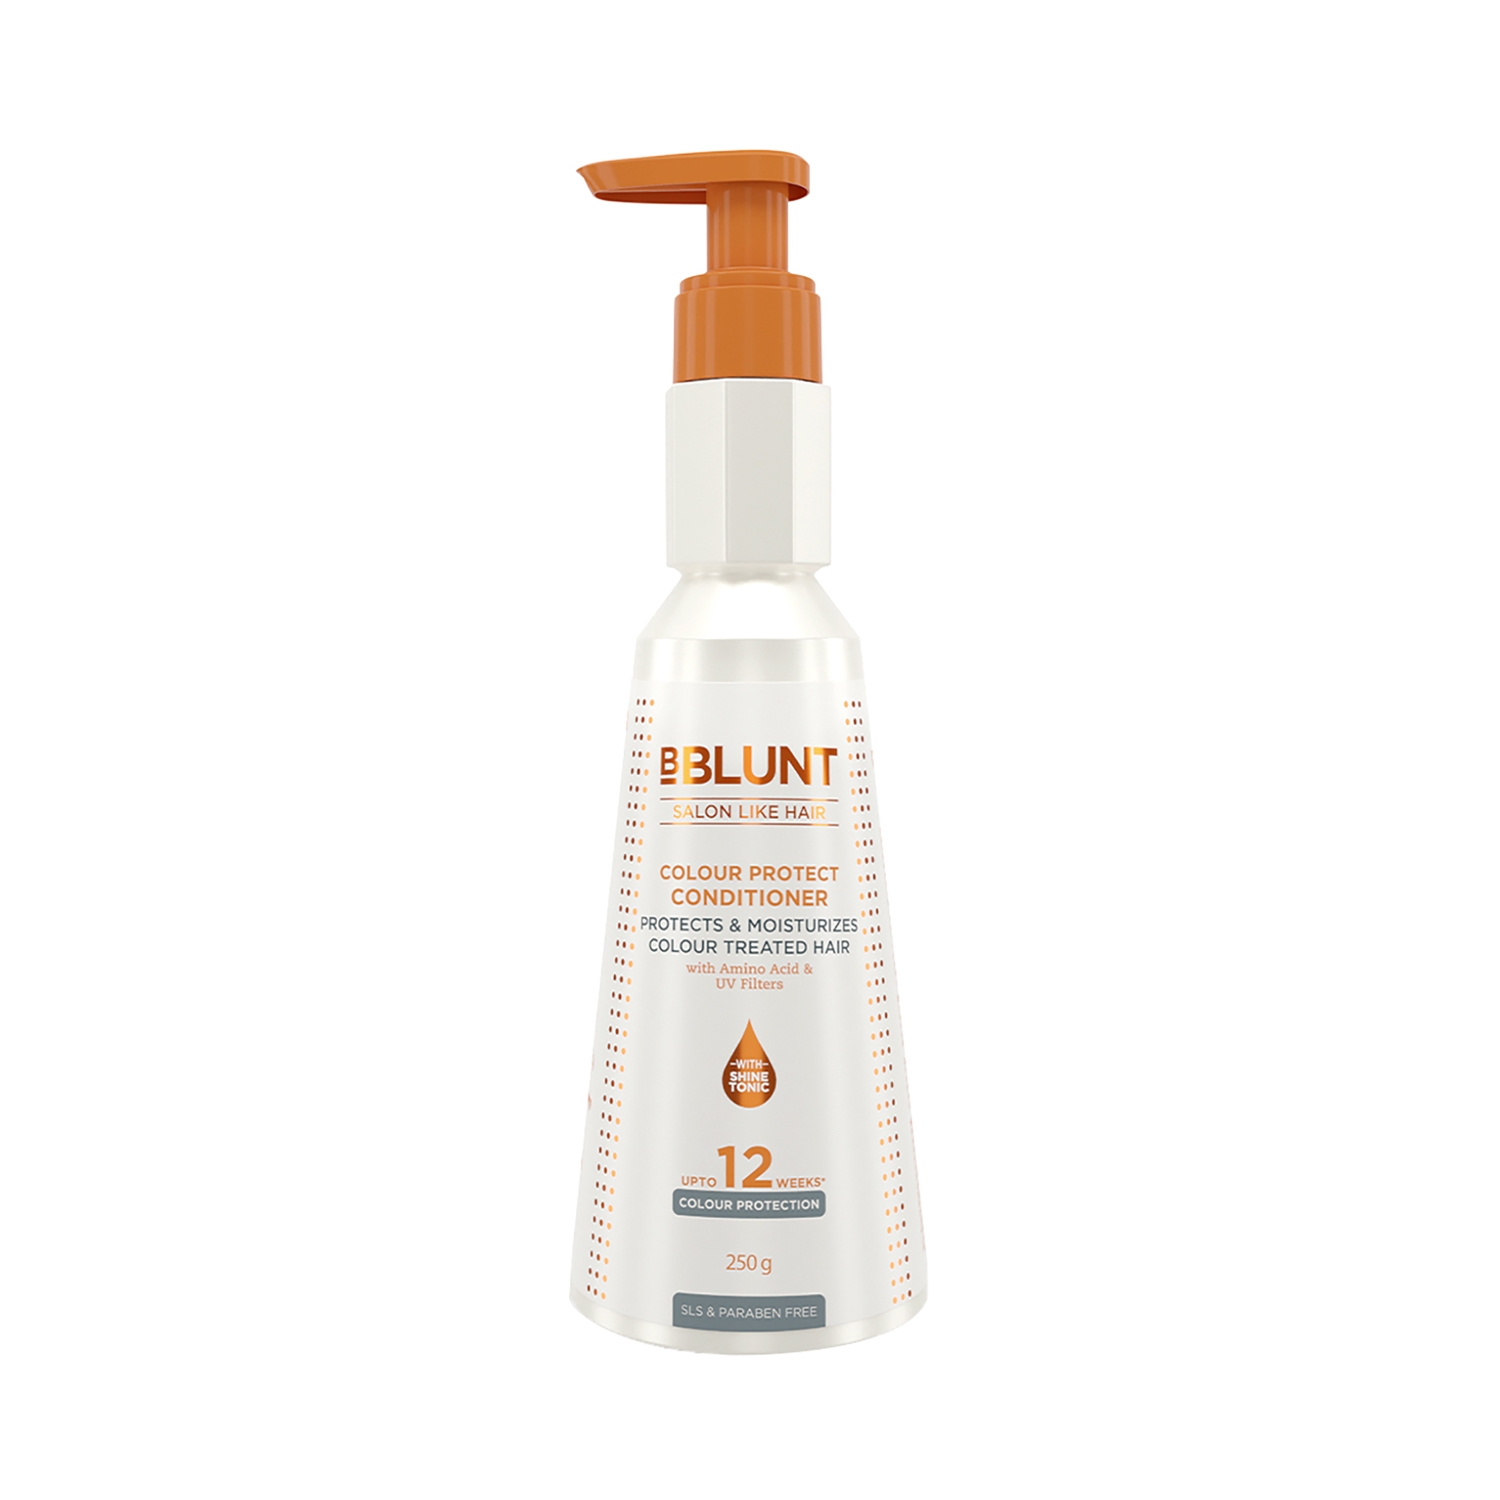 BBlunt | BBlunt Color Protect Conditioner Up To 12 Weeks Color Protection (250g)